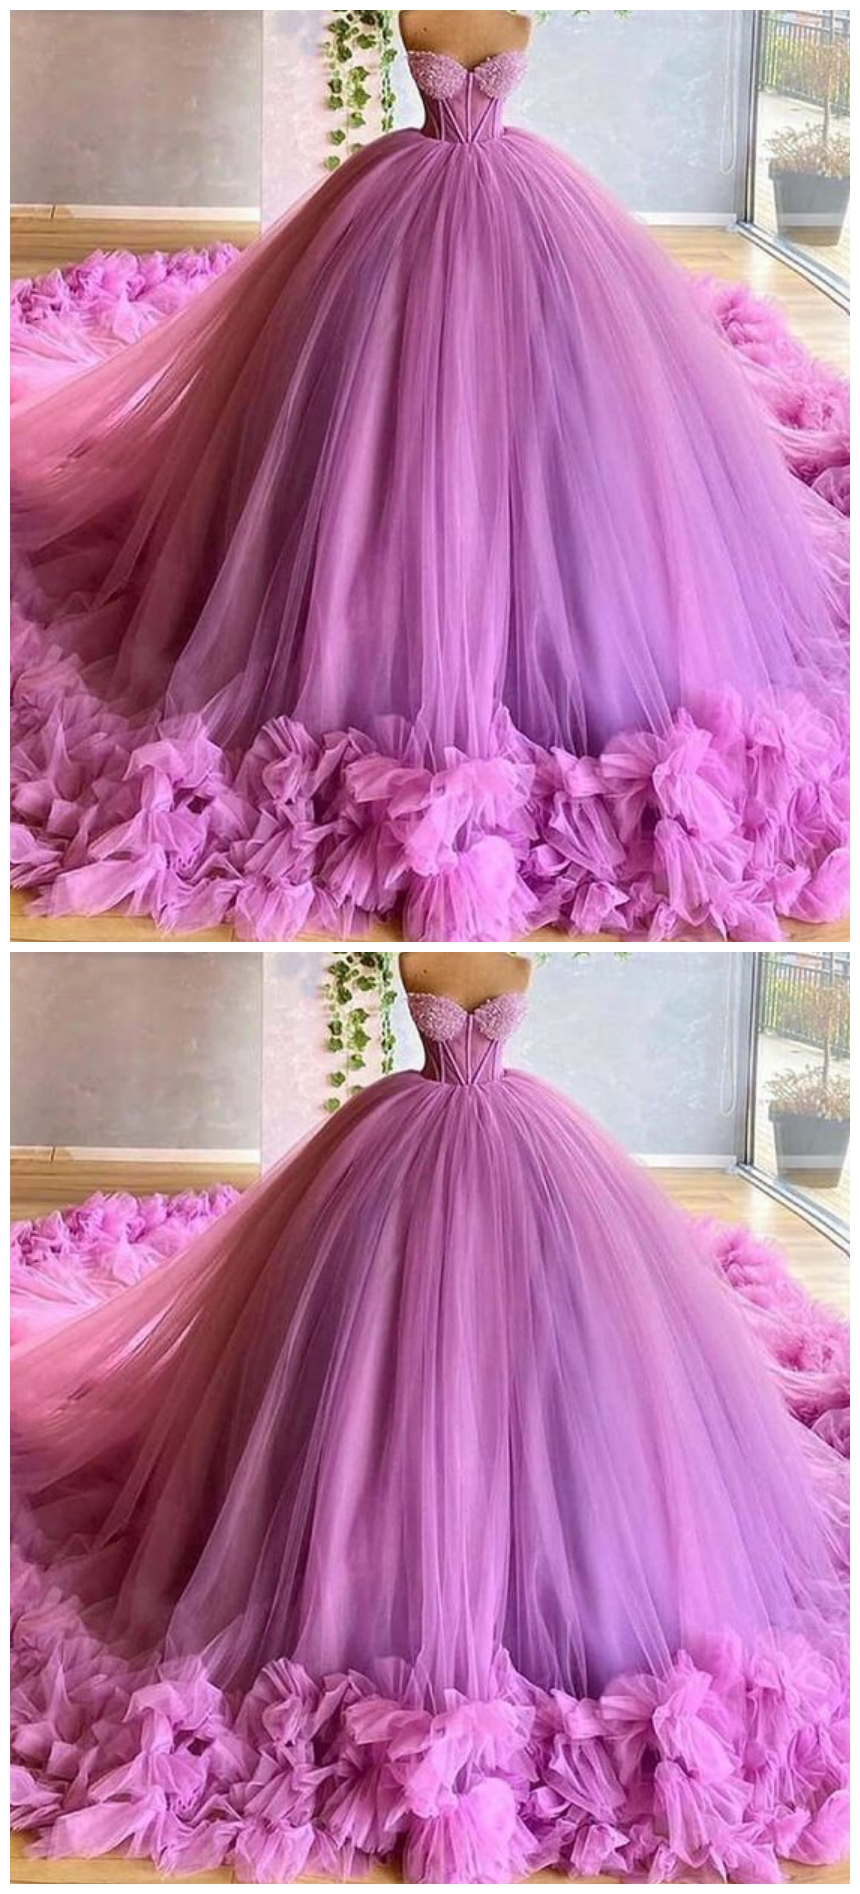 Gorgeous Sweetheart Beading Bodice Tulle Ball Gown